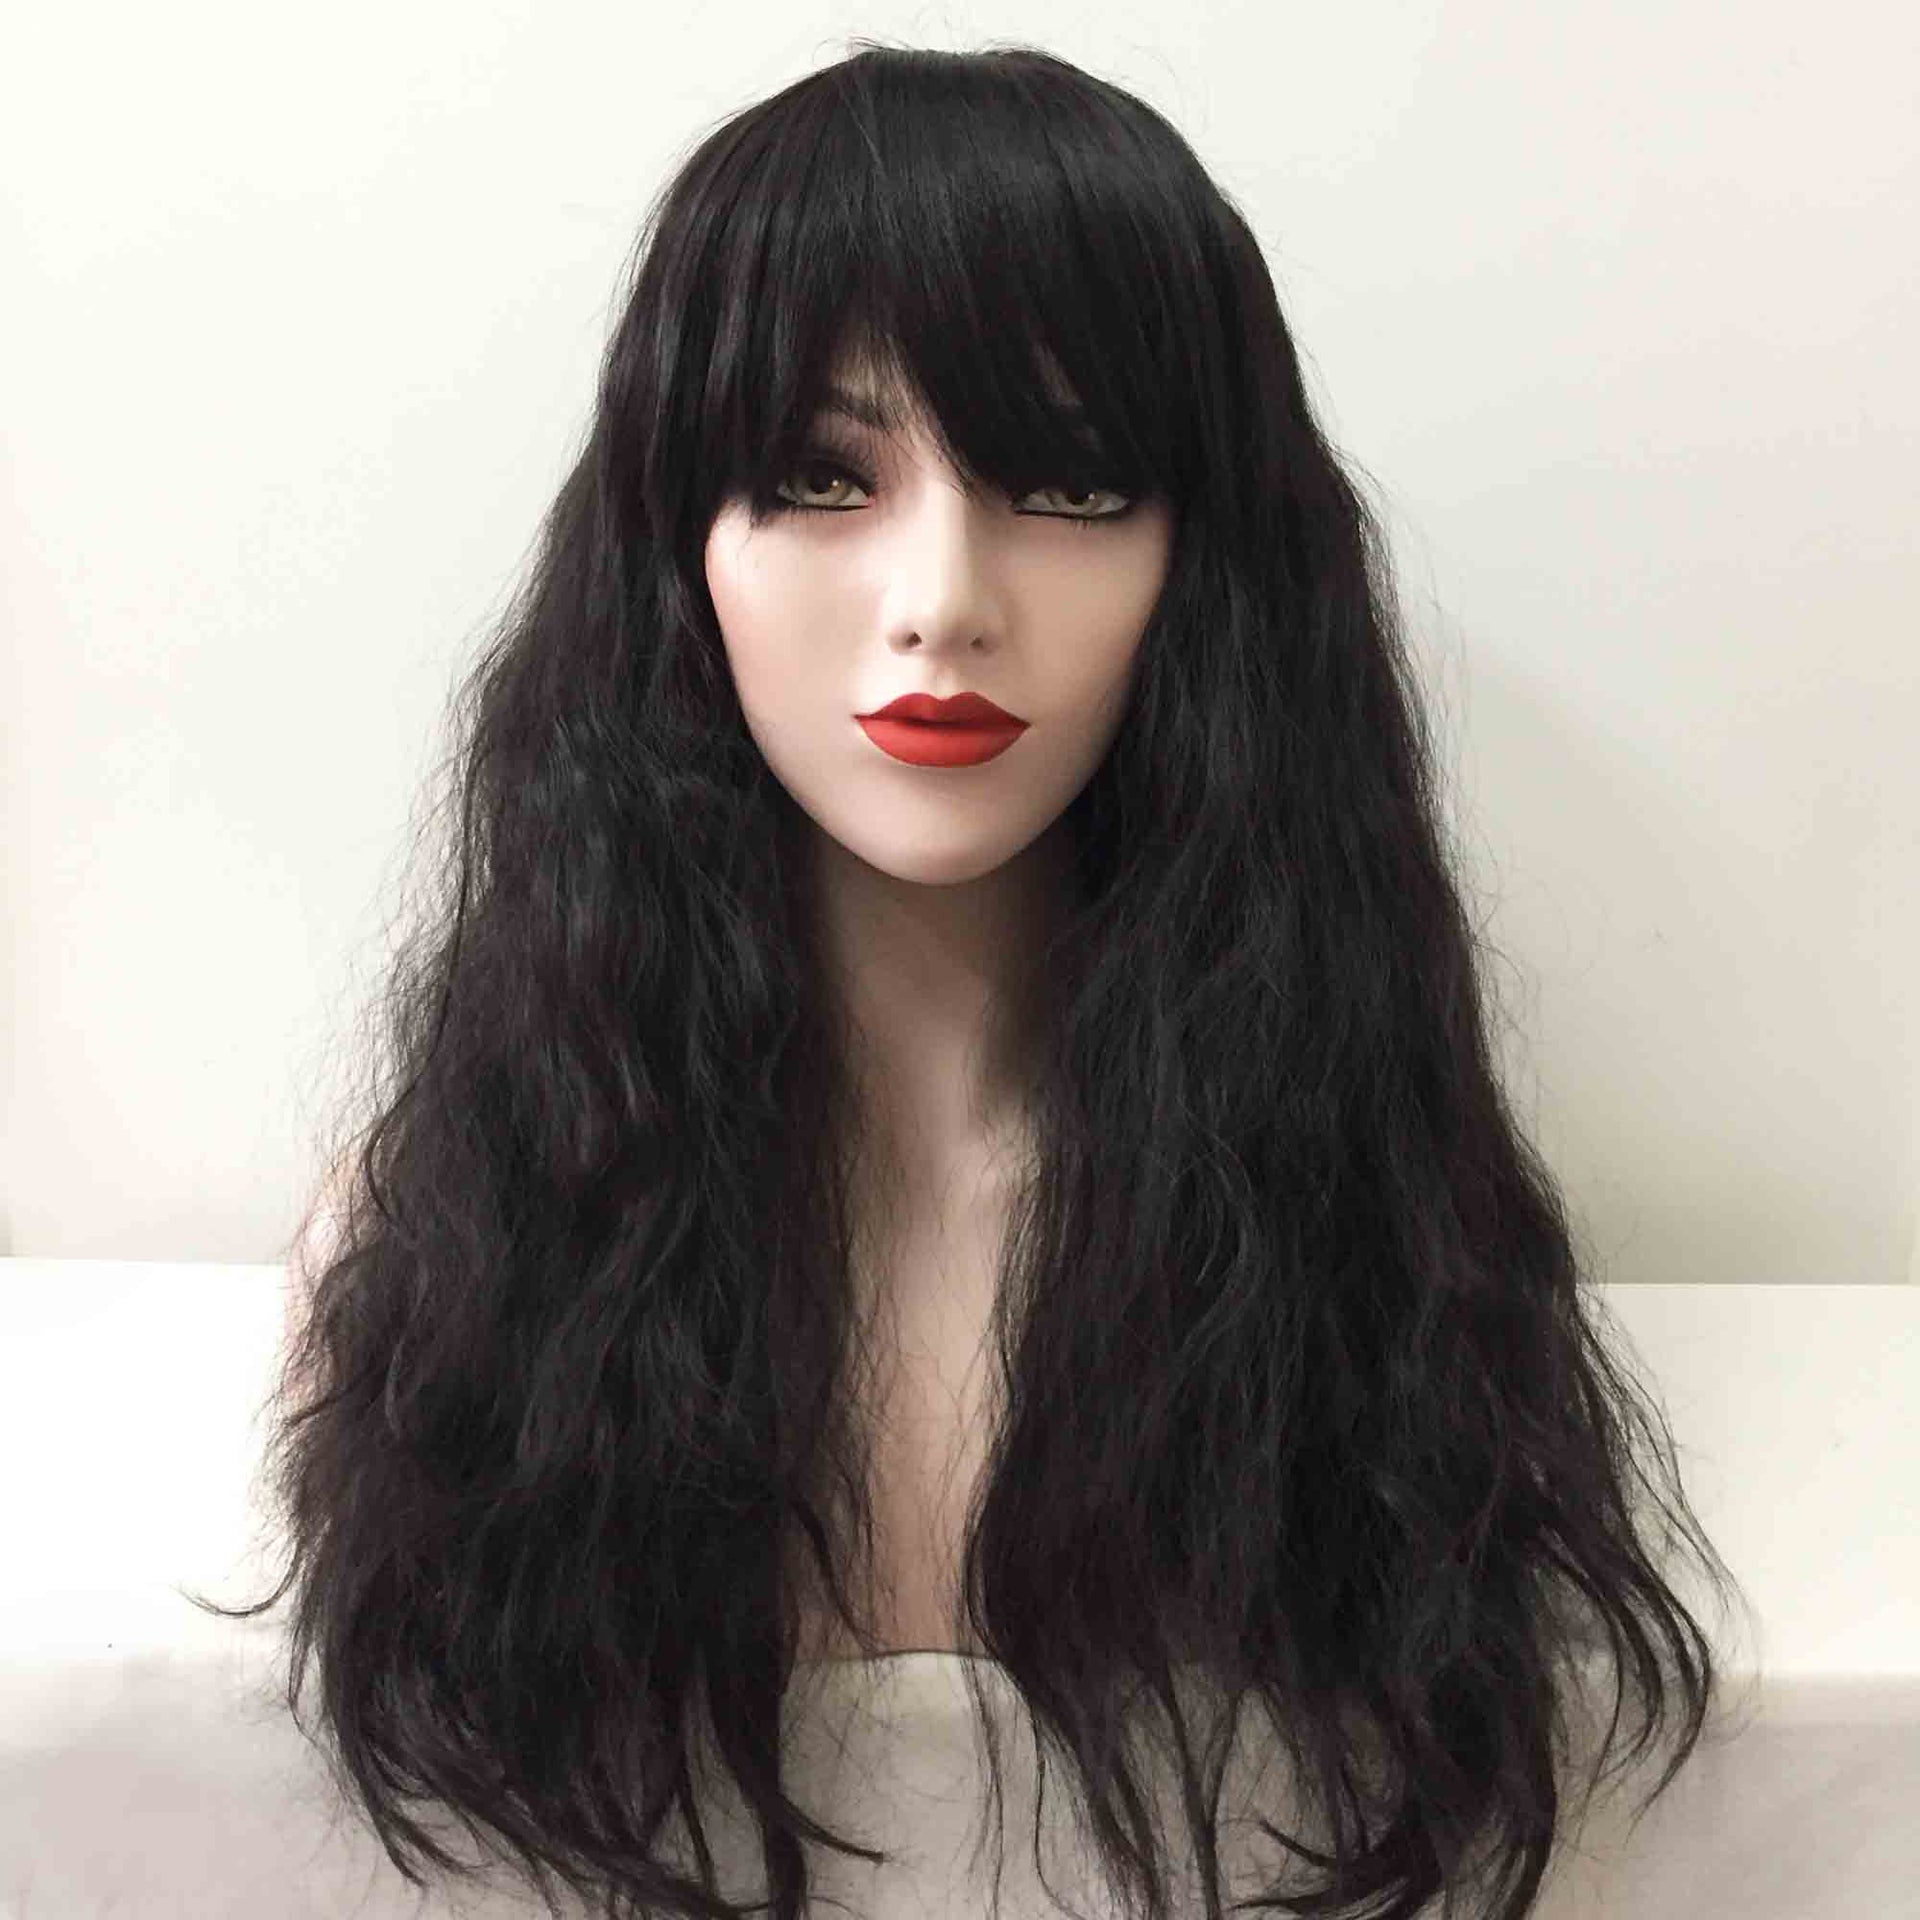 nevermindyrhead Women Black Long Curly Frizzy Fringe Bangs Thick Wig